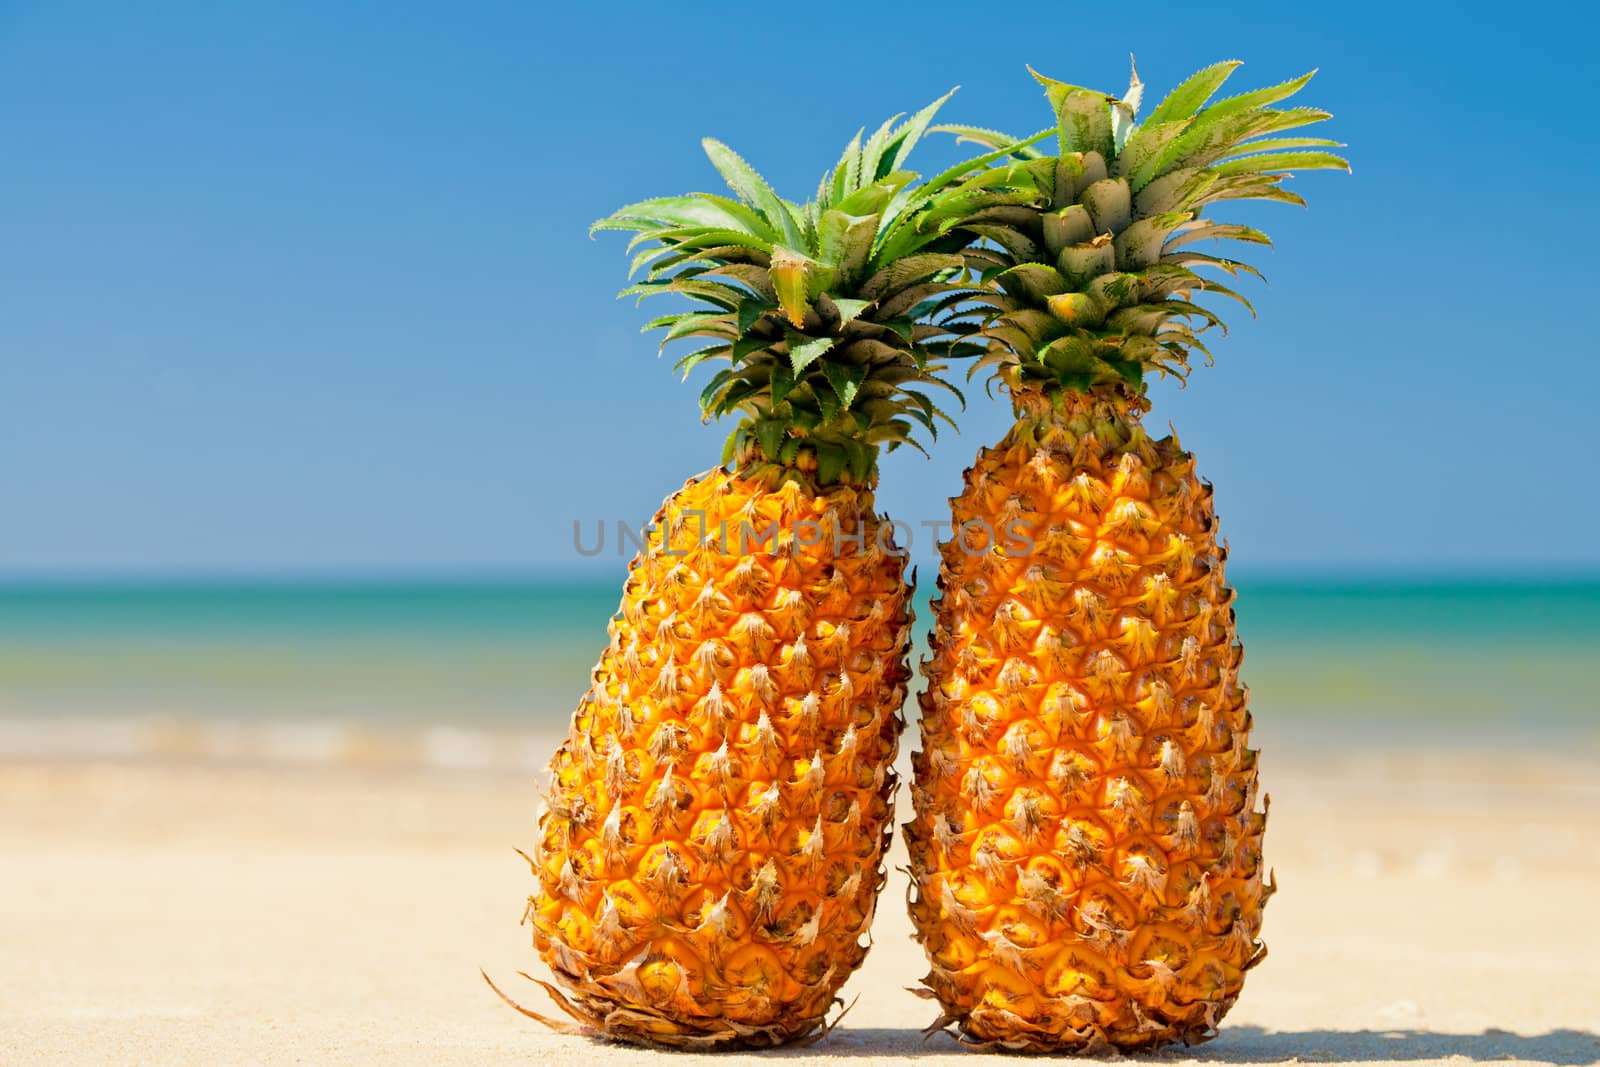 Two ripe pineapples on the sandy shore against clear blue sky